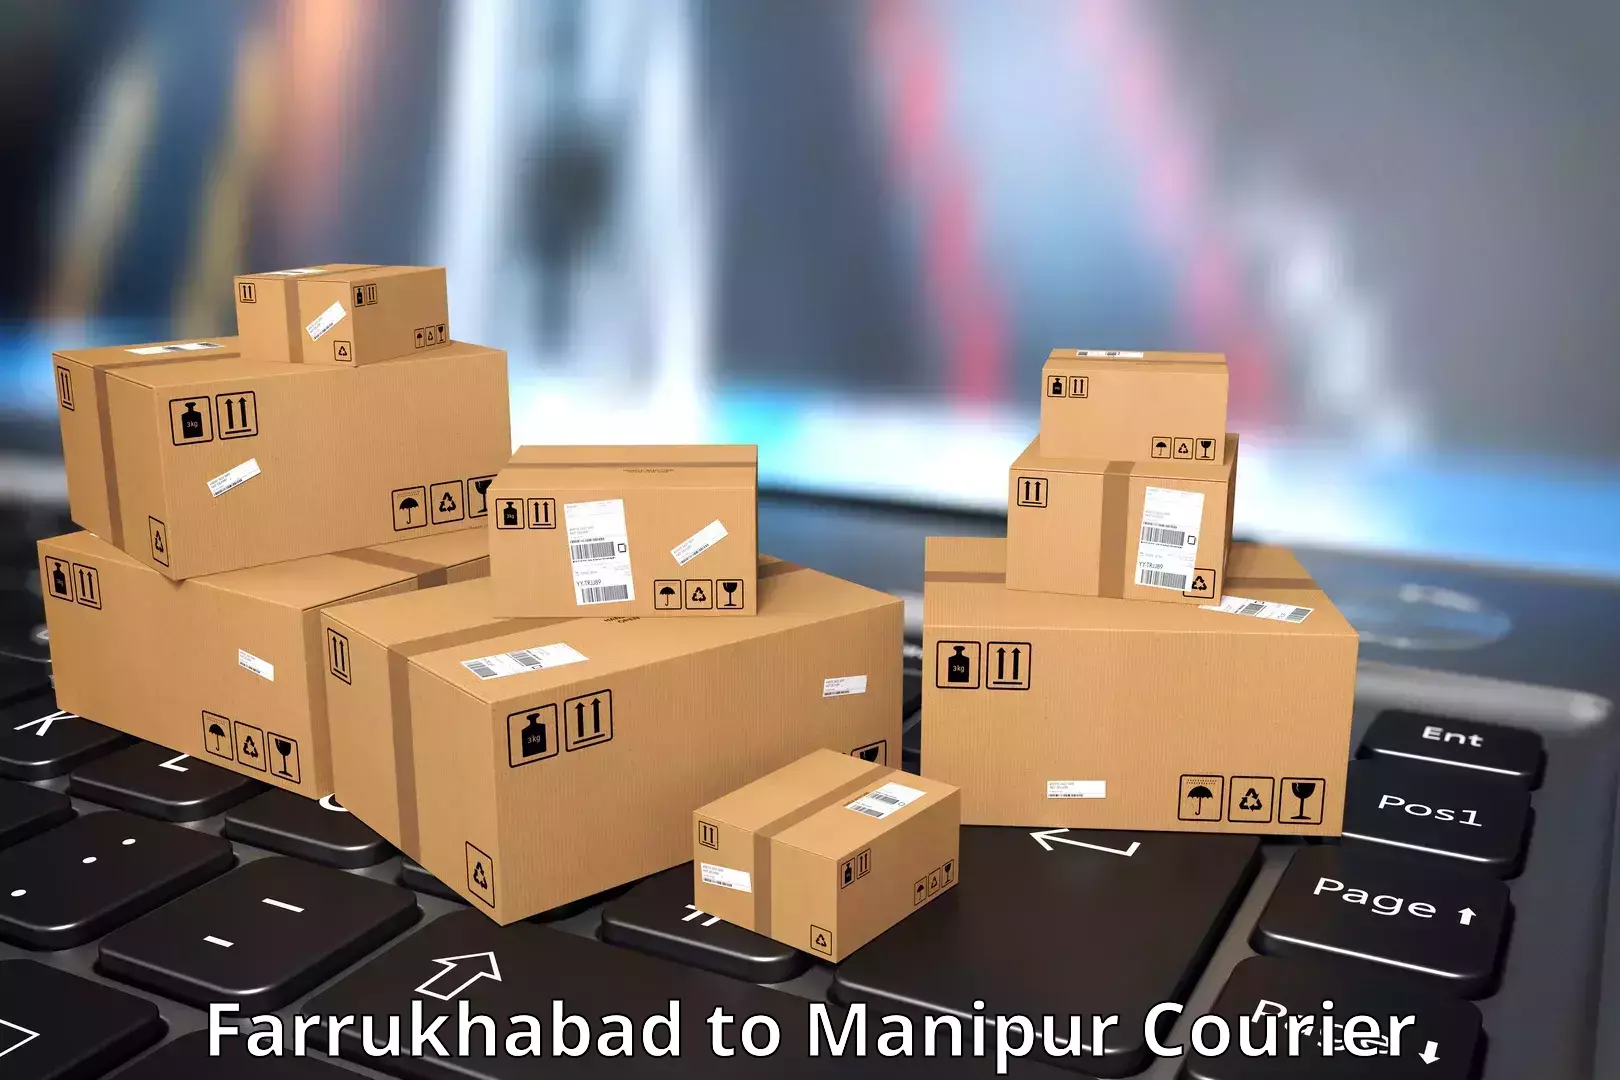 Multi-service courier options Farrukhabad to Manipur